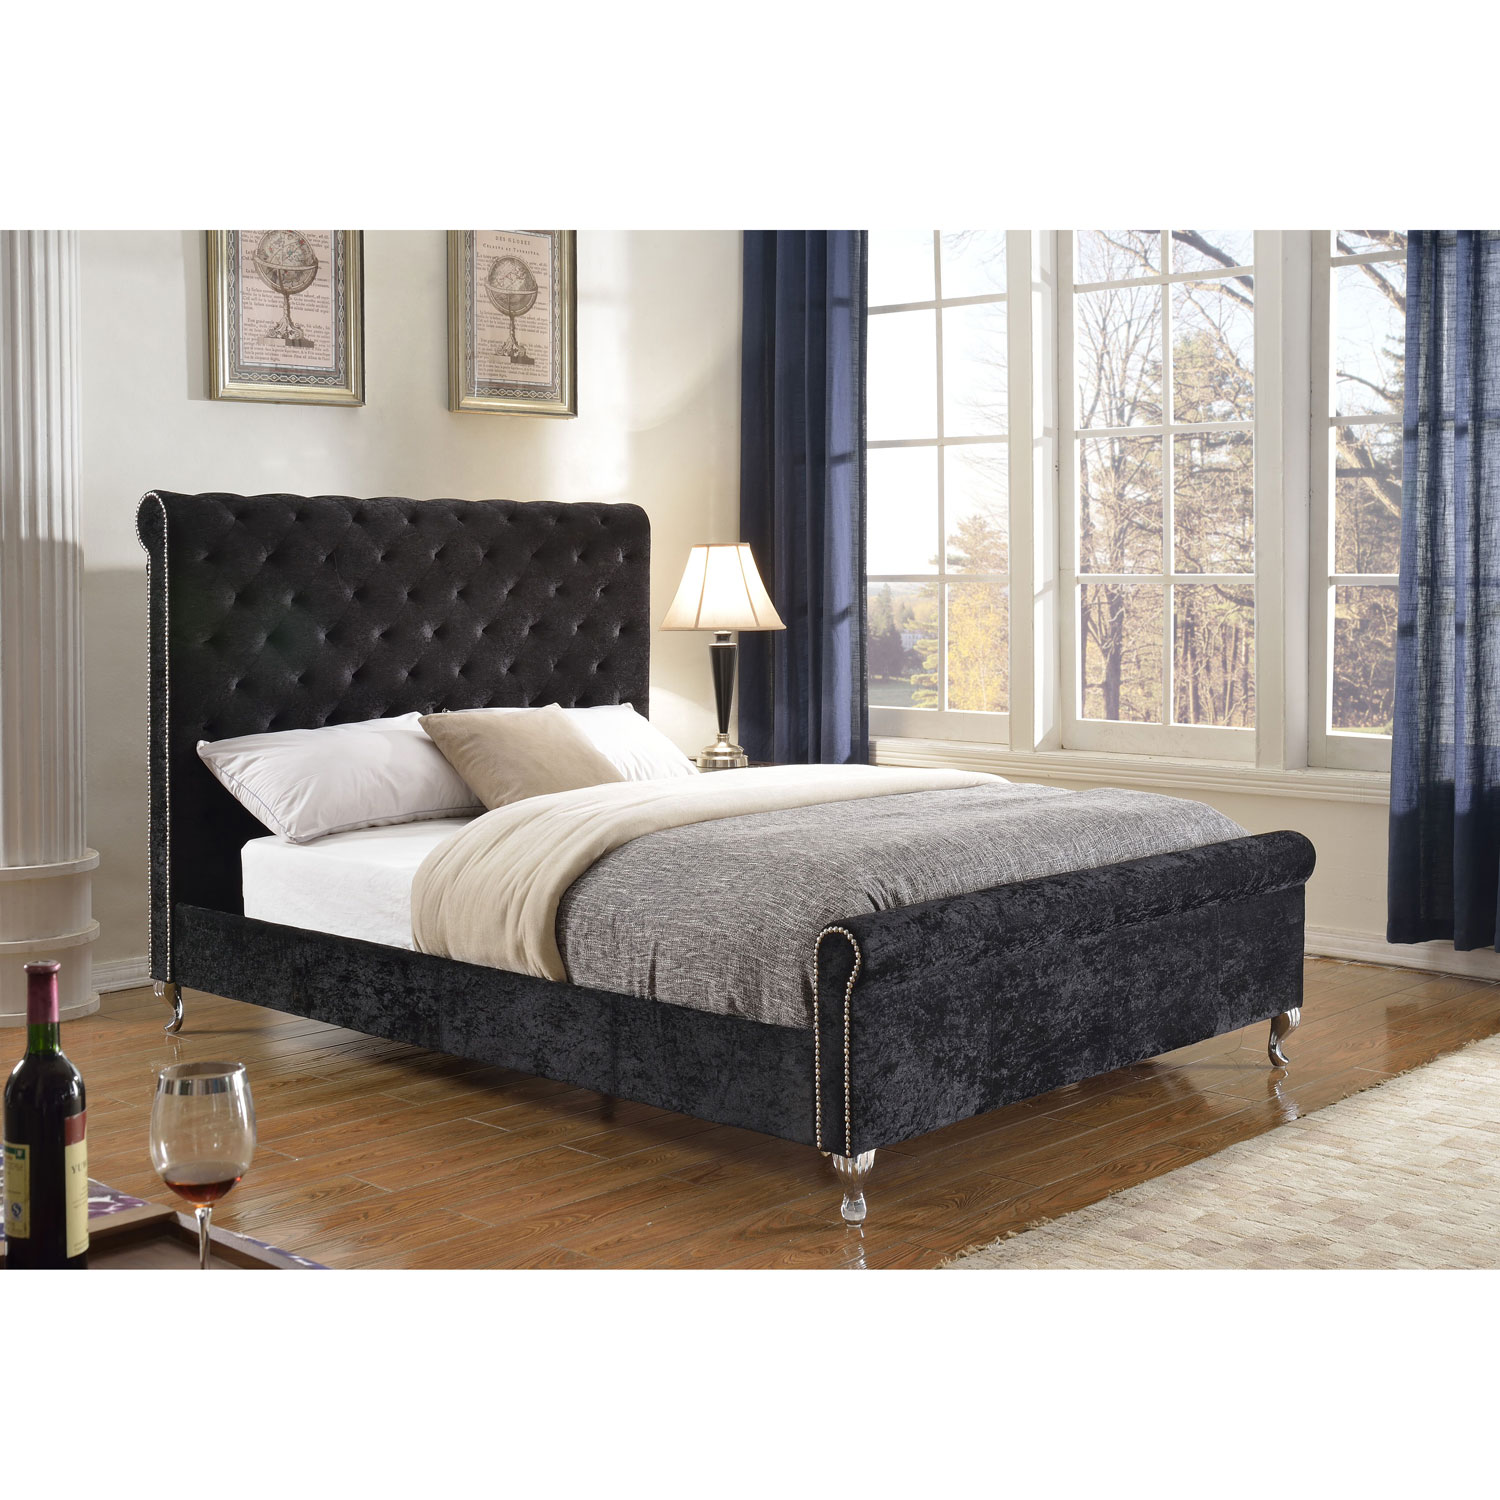 Victoria Modern Bed - Double - Black